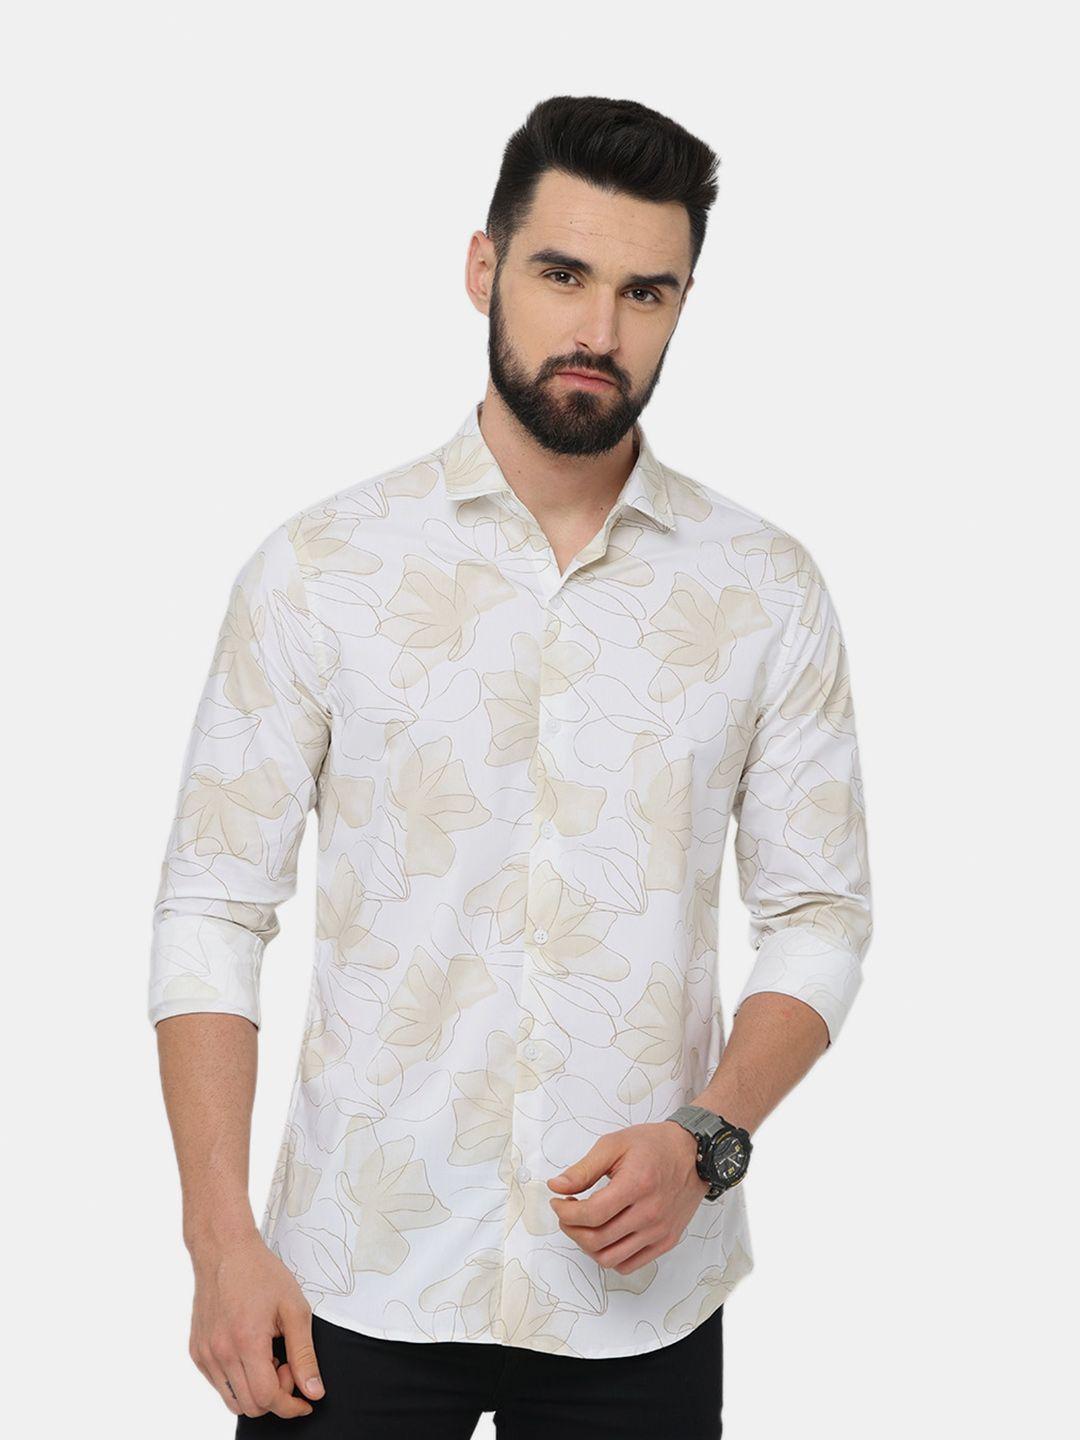 fly 69 premium slim fit floral printed pure cotton casual shirt